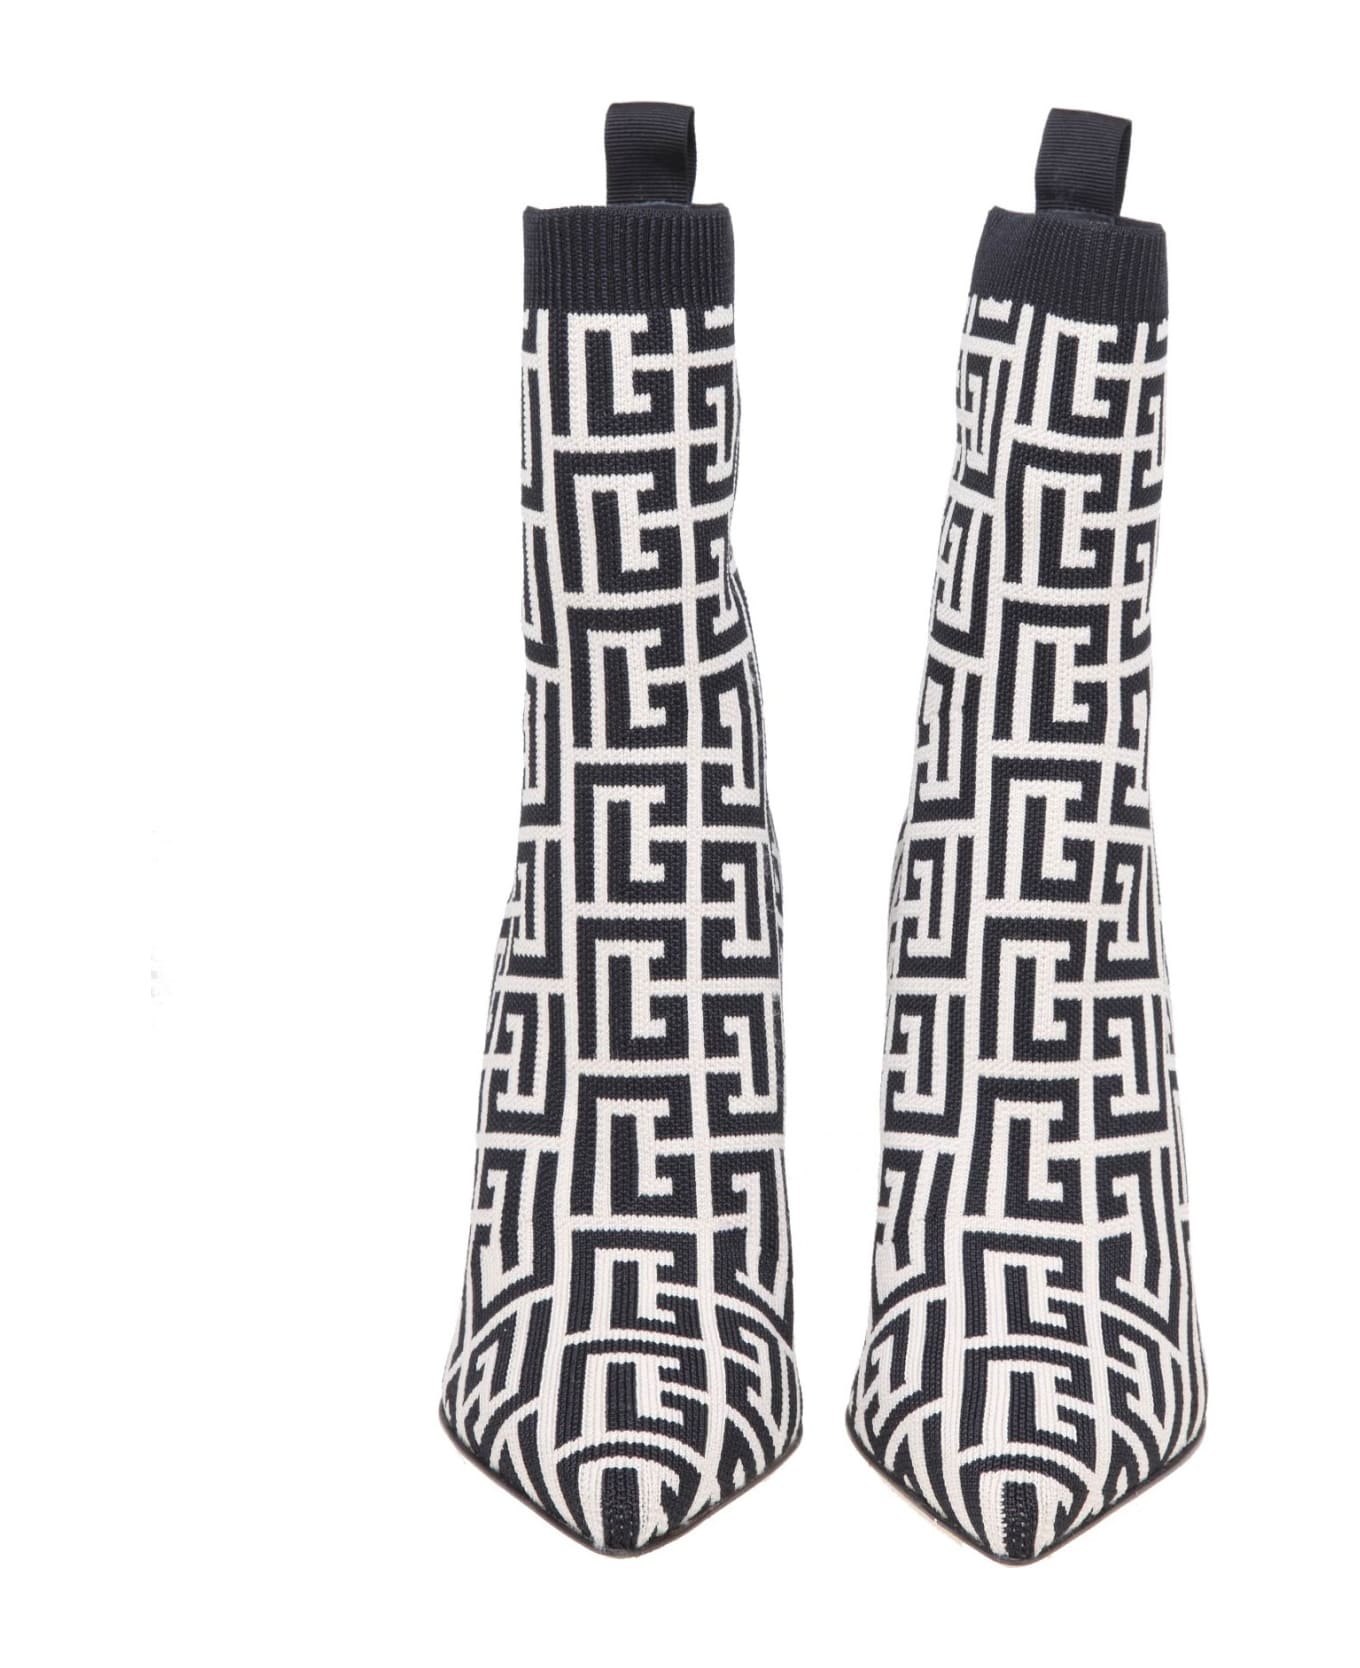 Balmain Black And Ivory Knitted Monogram Ankle Boots - IVOIRE/NOIR